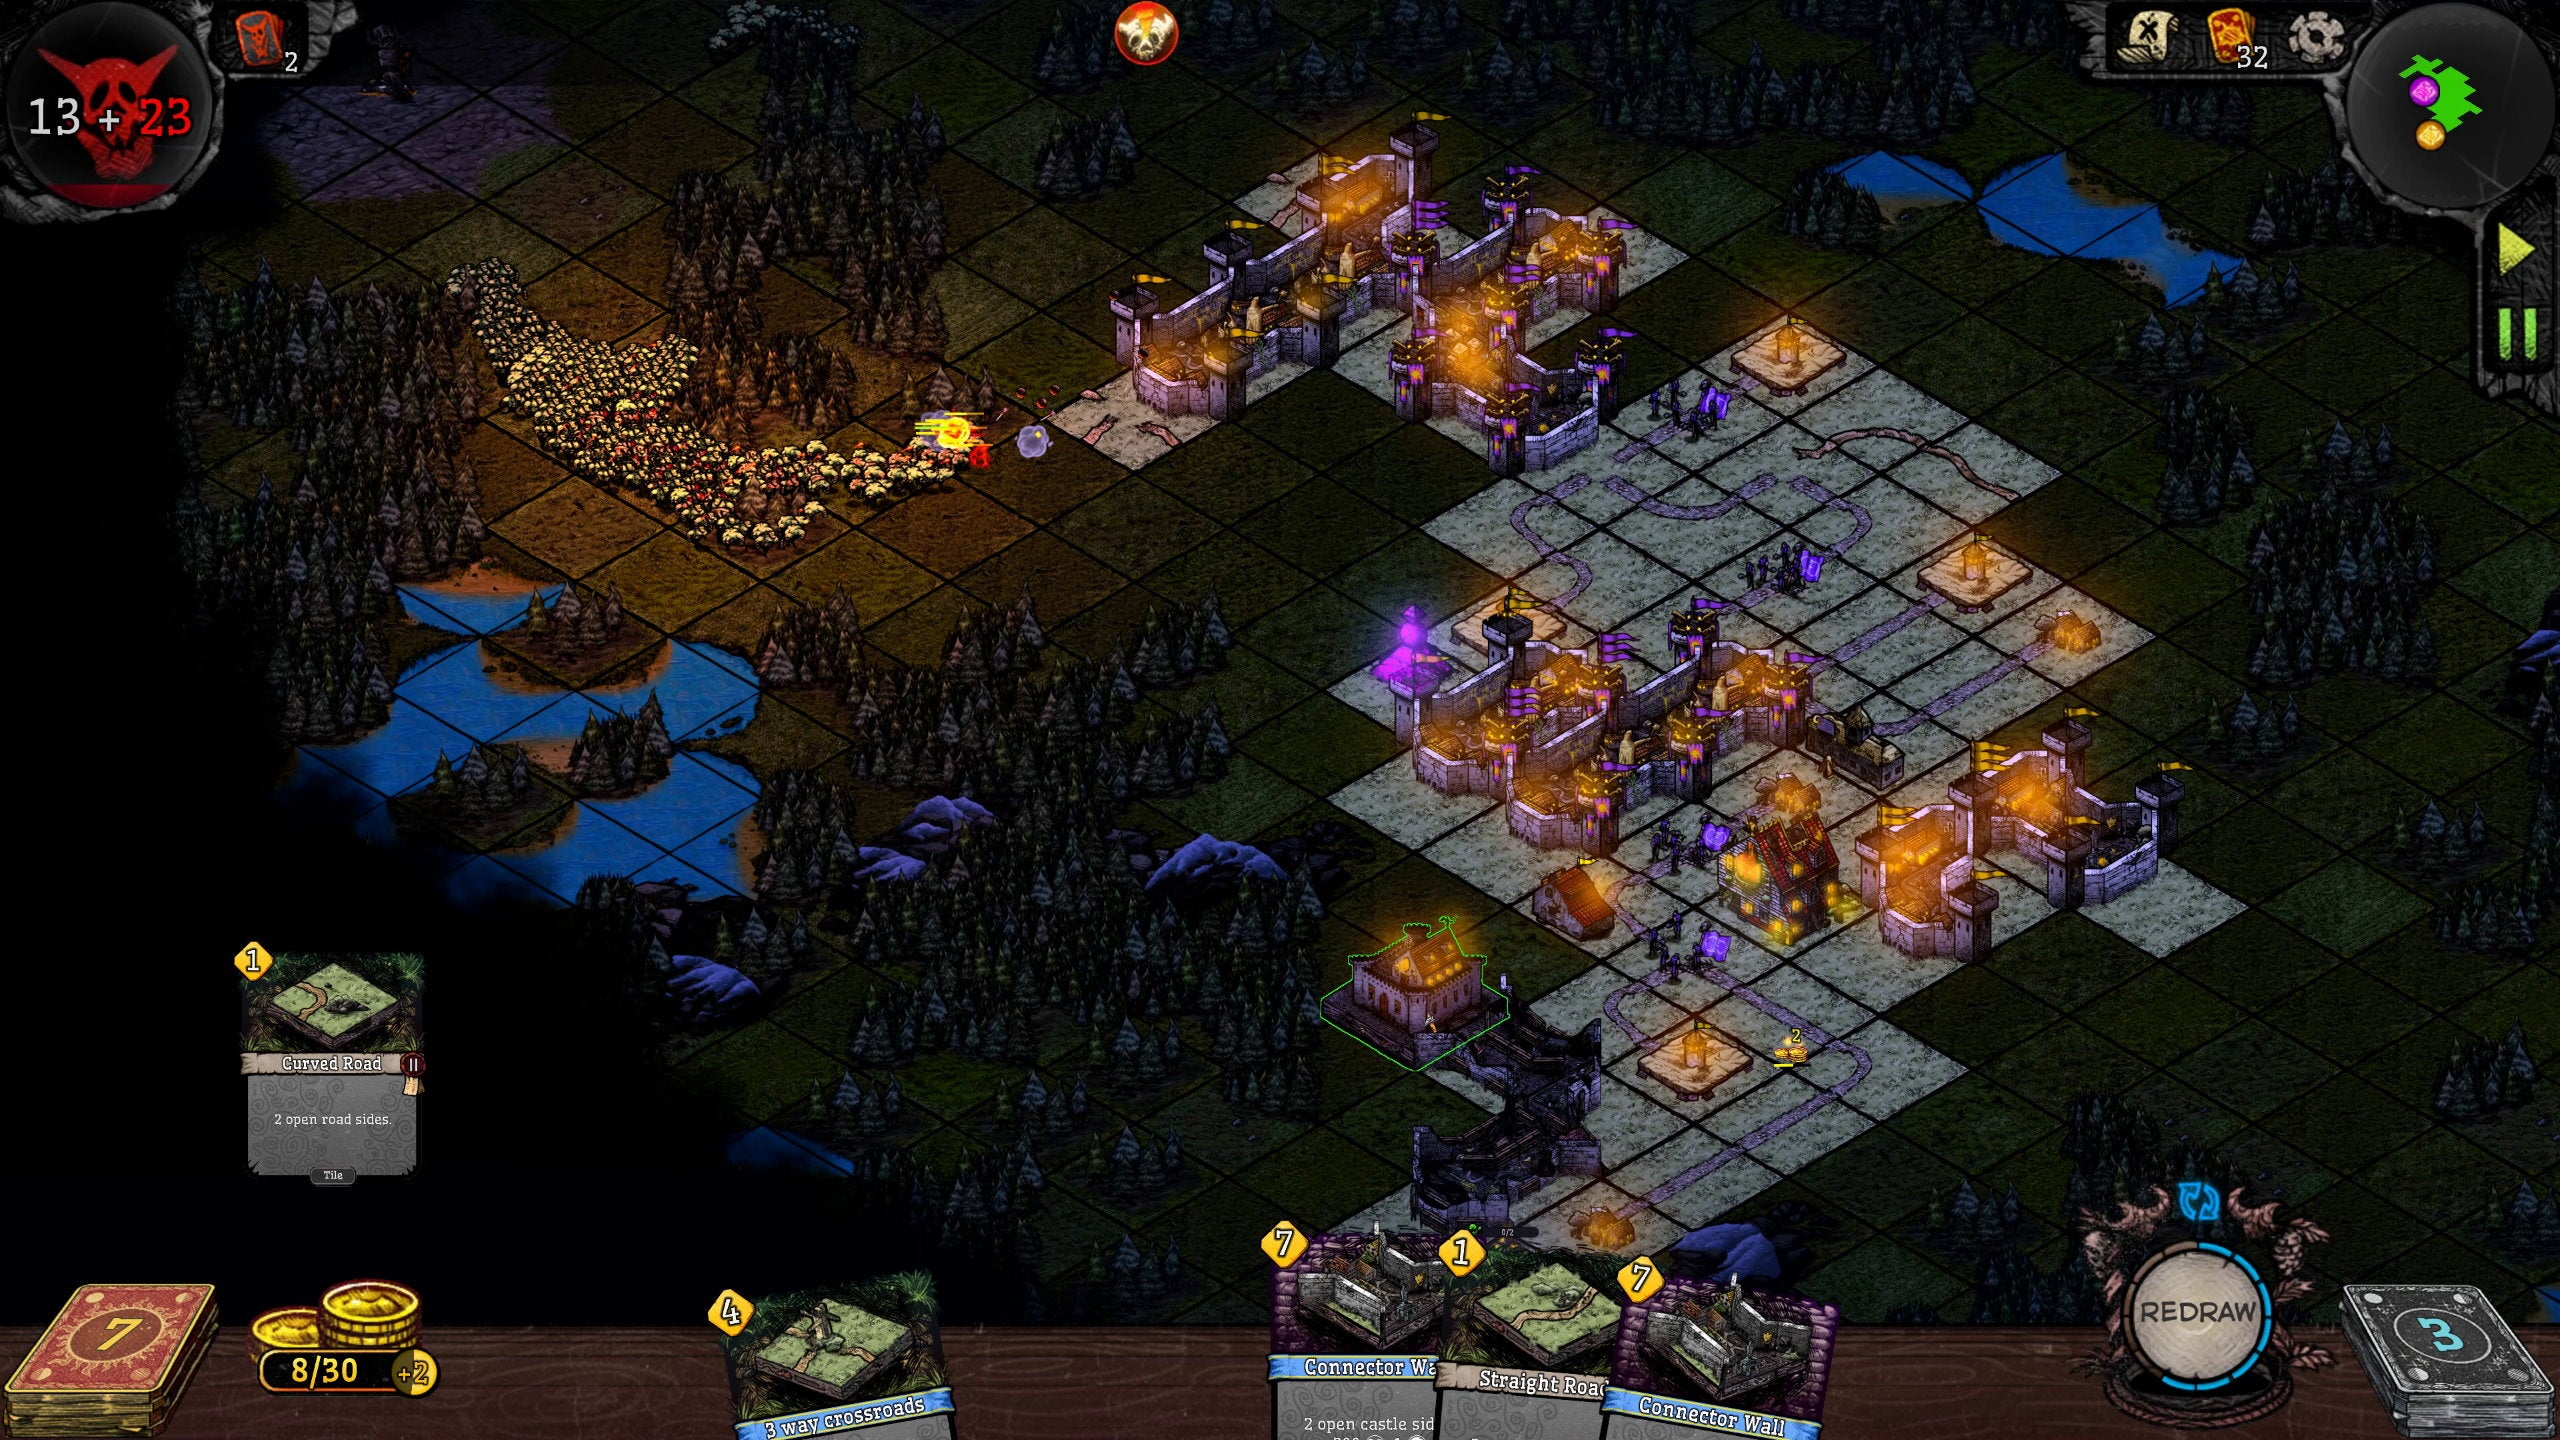 A large army of orcs approach numerous castles at night in ORX